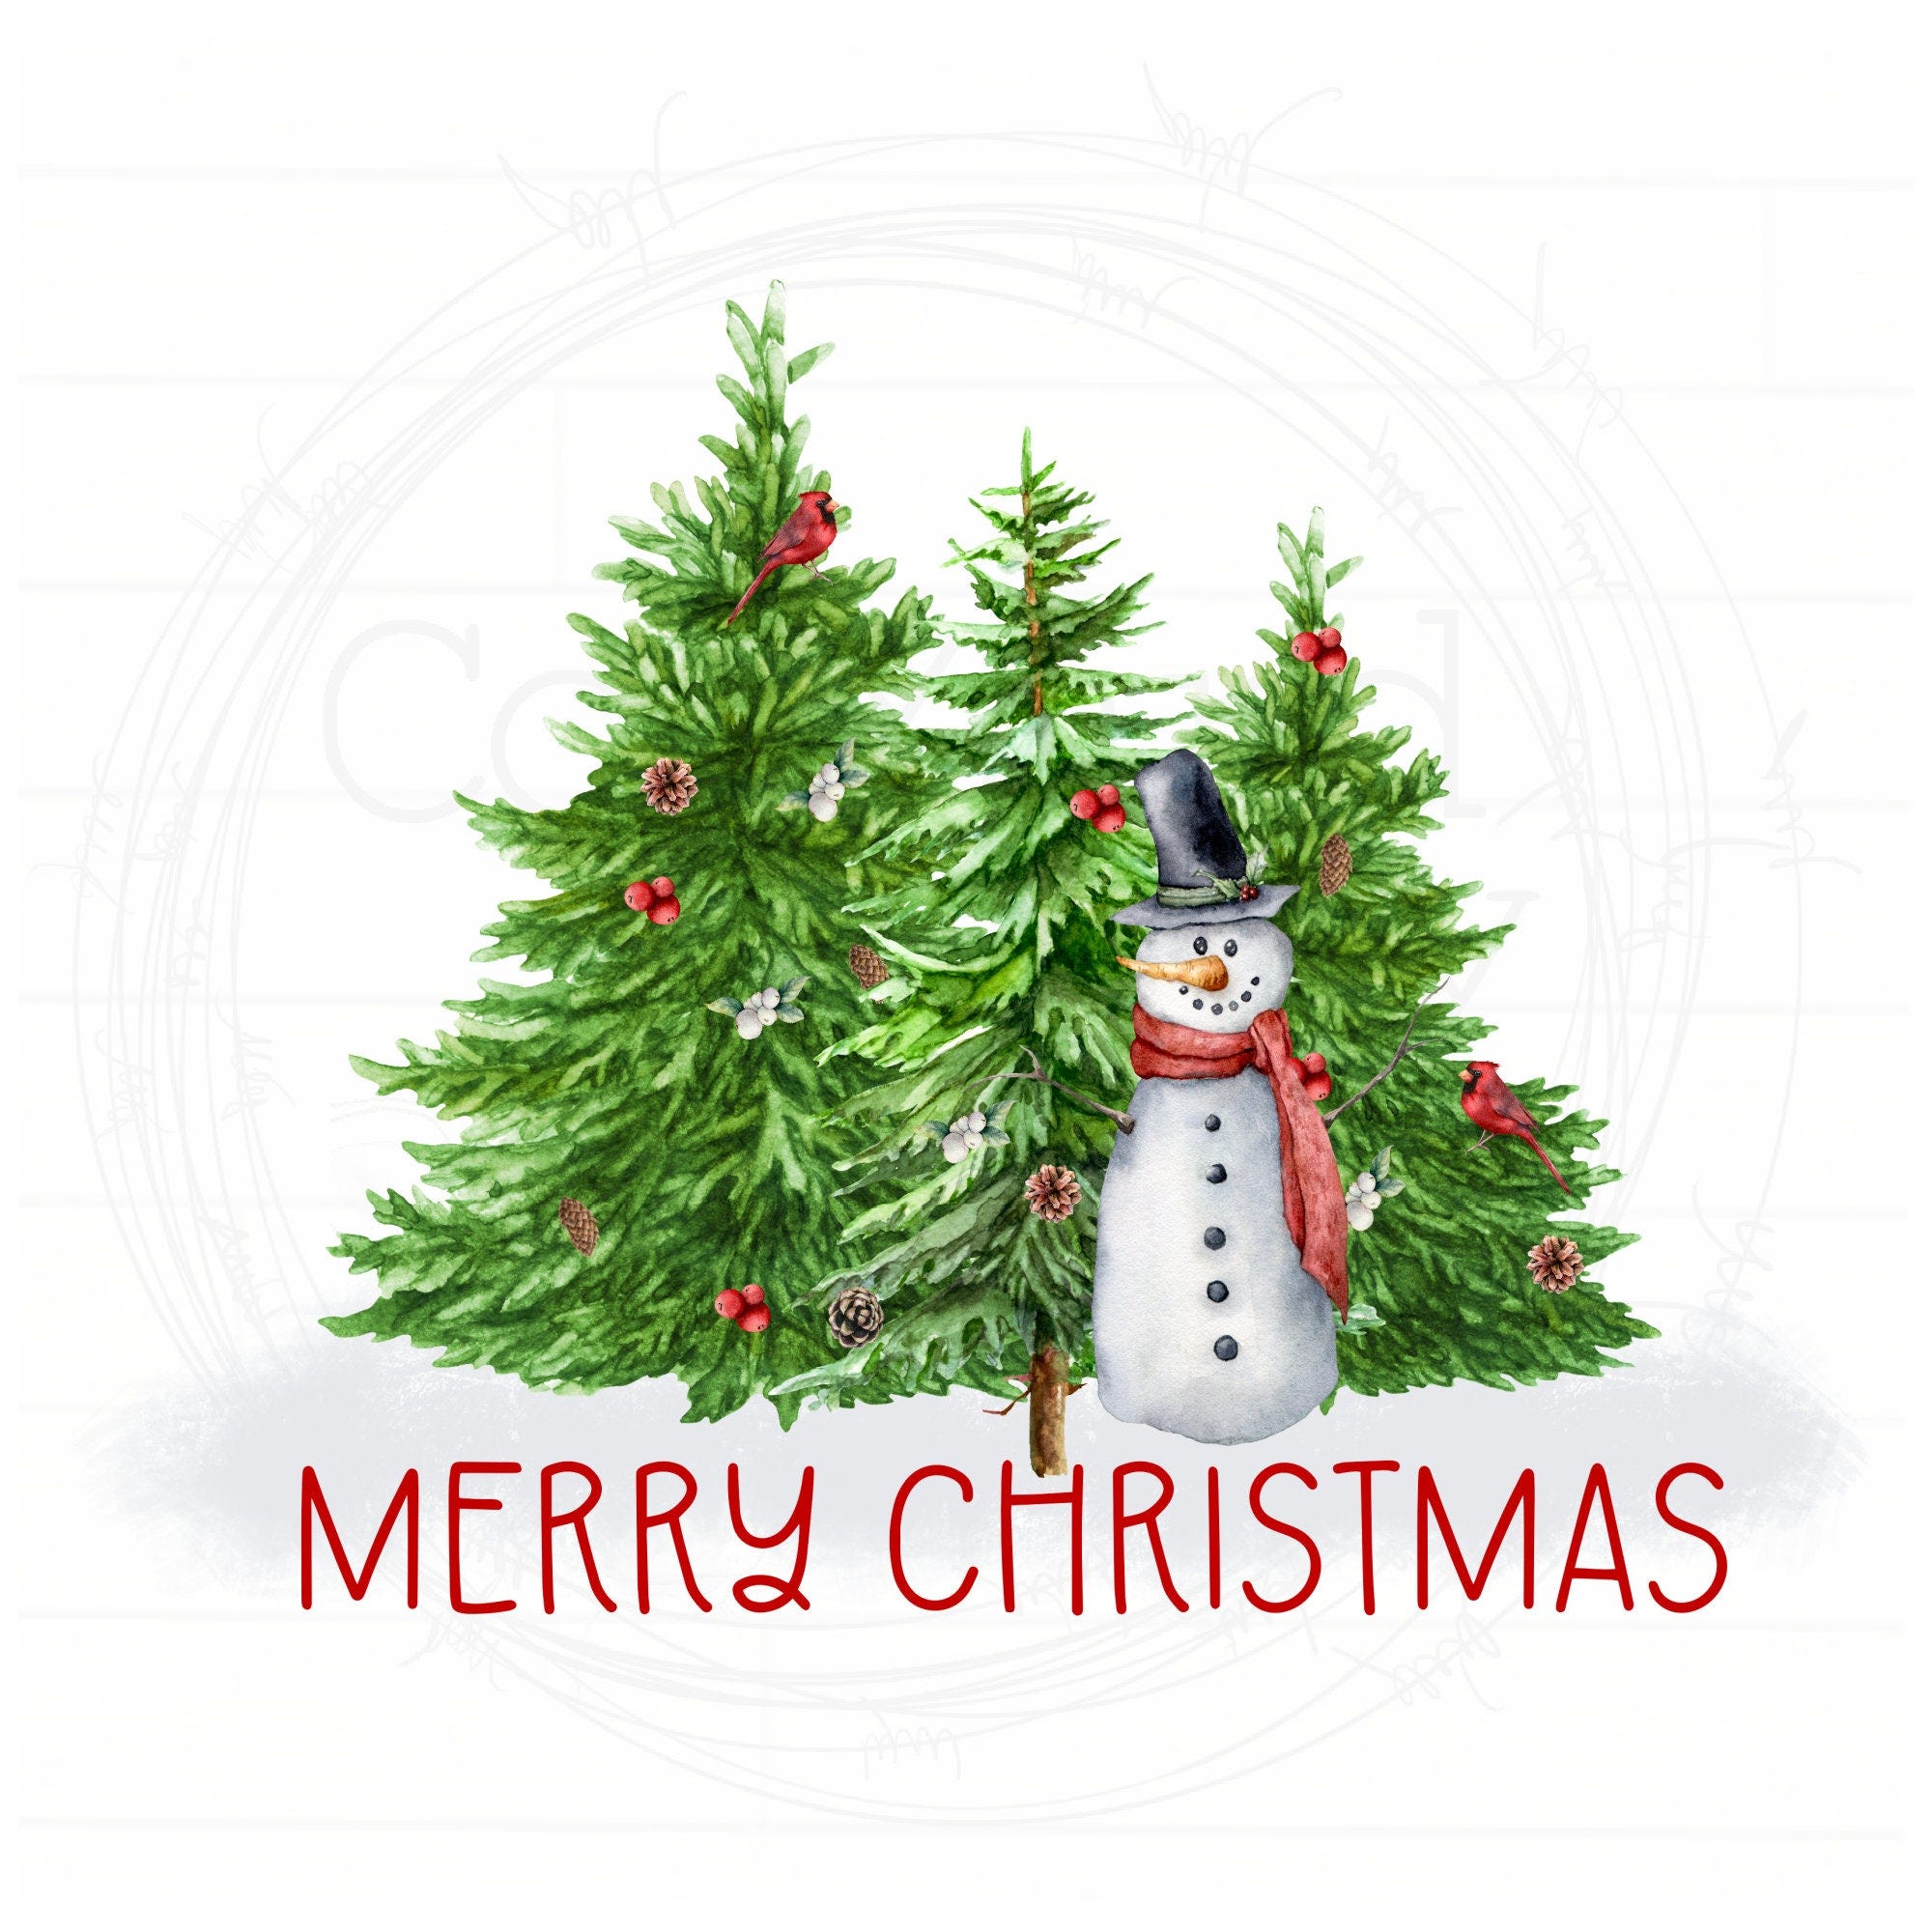 Christmas Trees and Snowman PNG, Christmas Images, Christmas Sublimation, Kitchen png Christmas PNG, Digital Downloads, Snowman, Winter